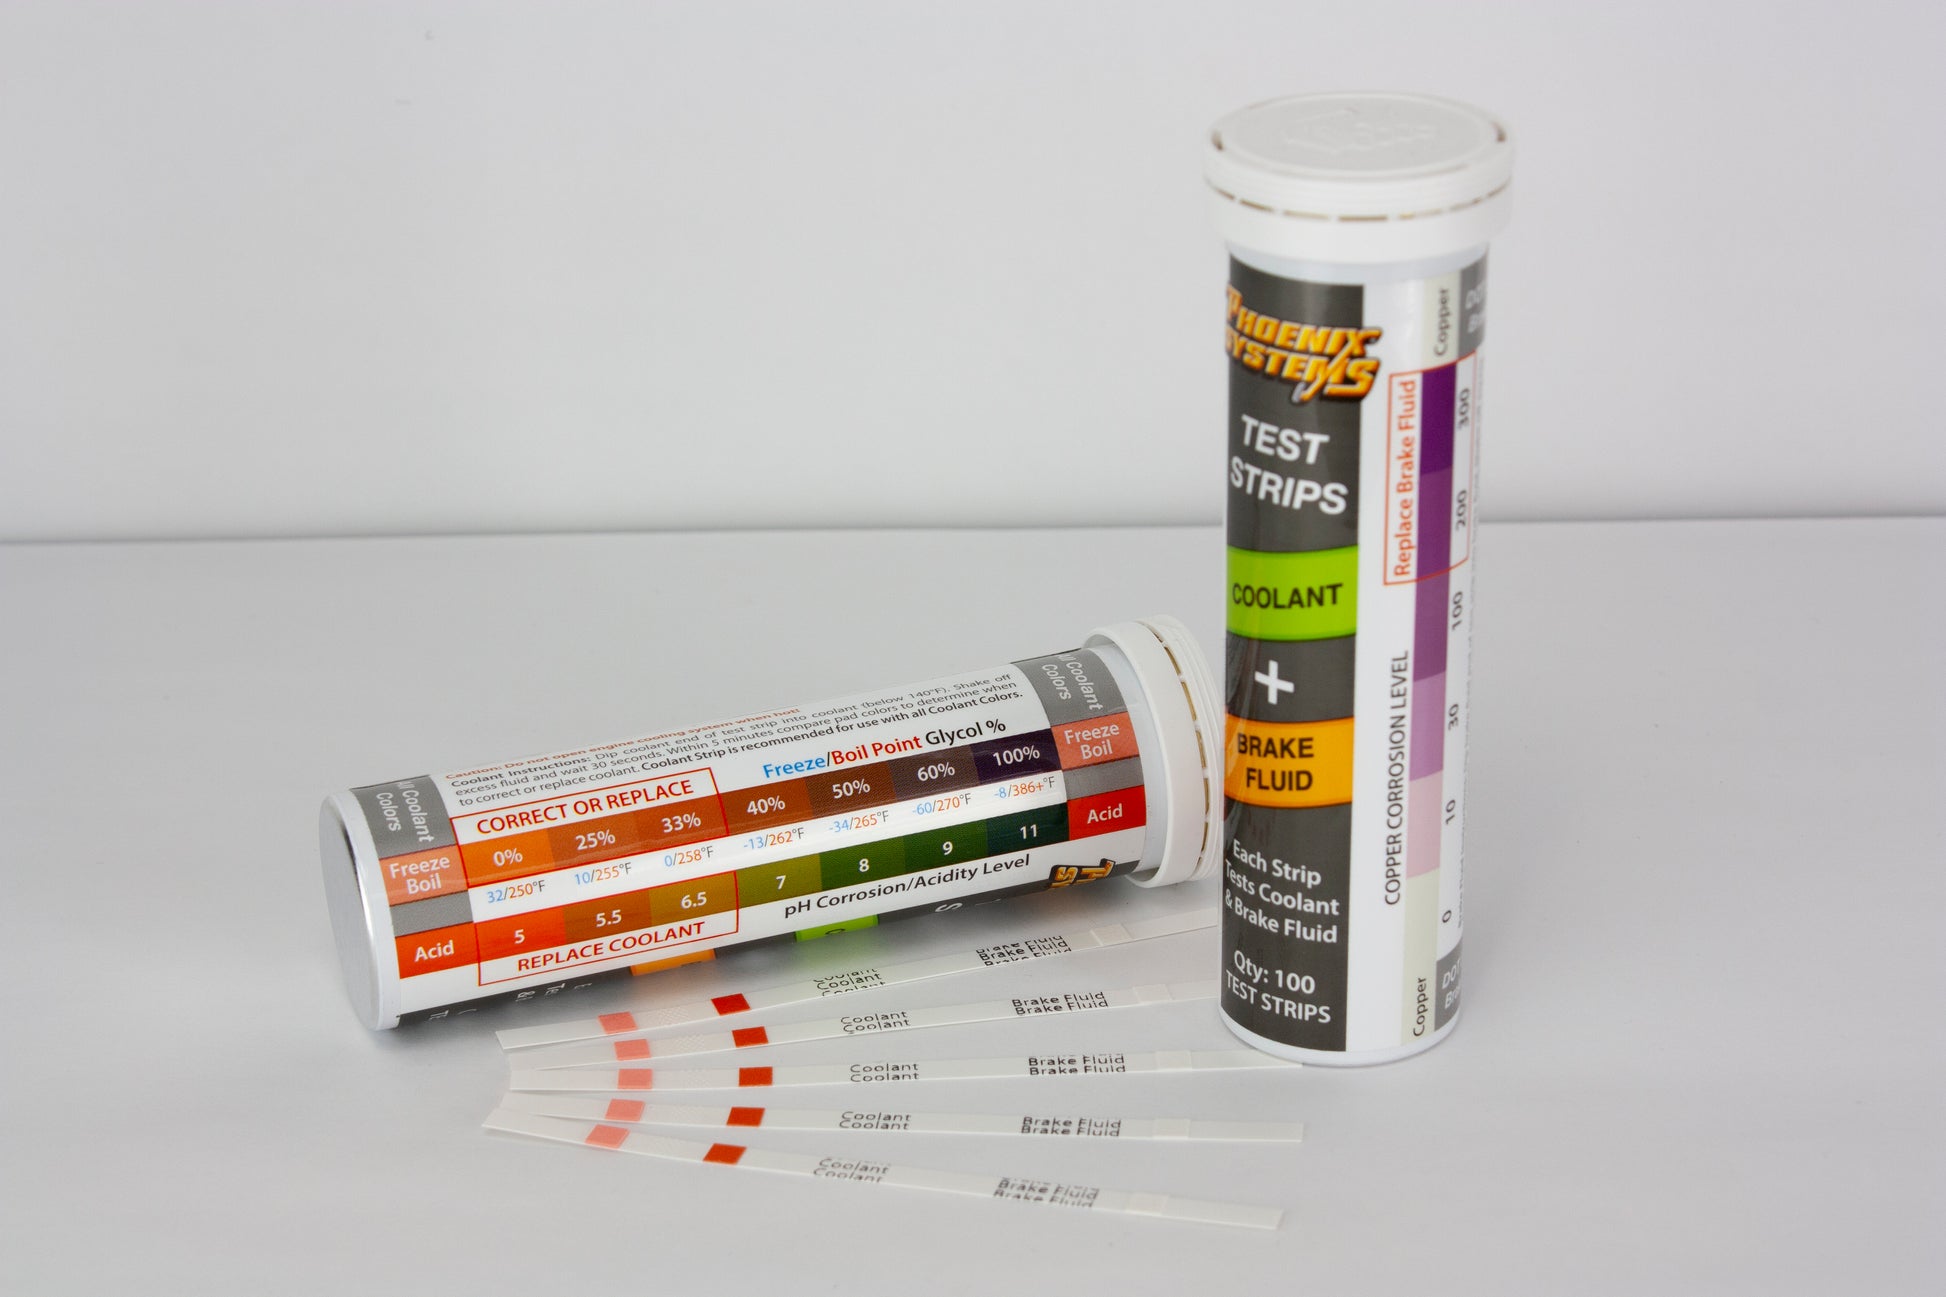 A package of coolant test strips is depicted, likely containing 100 strips. A chart on the package translates the color change of the dipped strip into coolant health readings like freezing point, boiling point, and acidity. This helps you decide if your car's coolant needs replacing to prevent engine overheating.